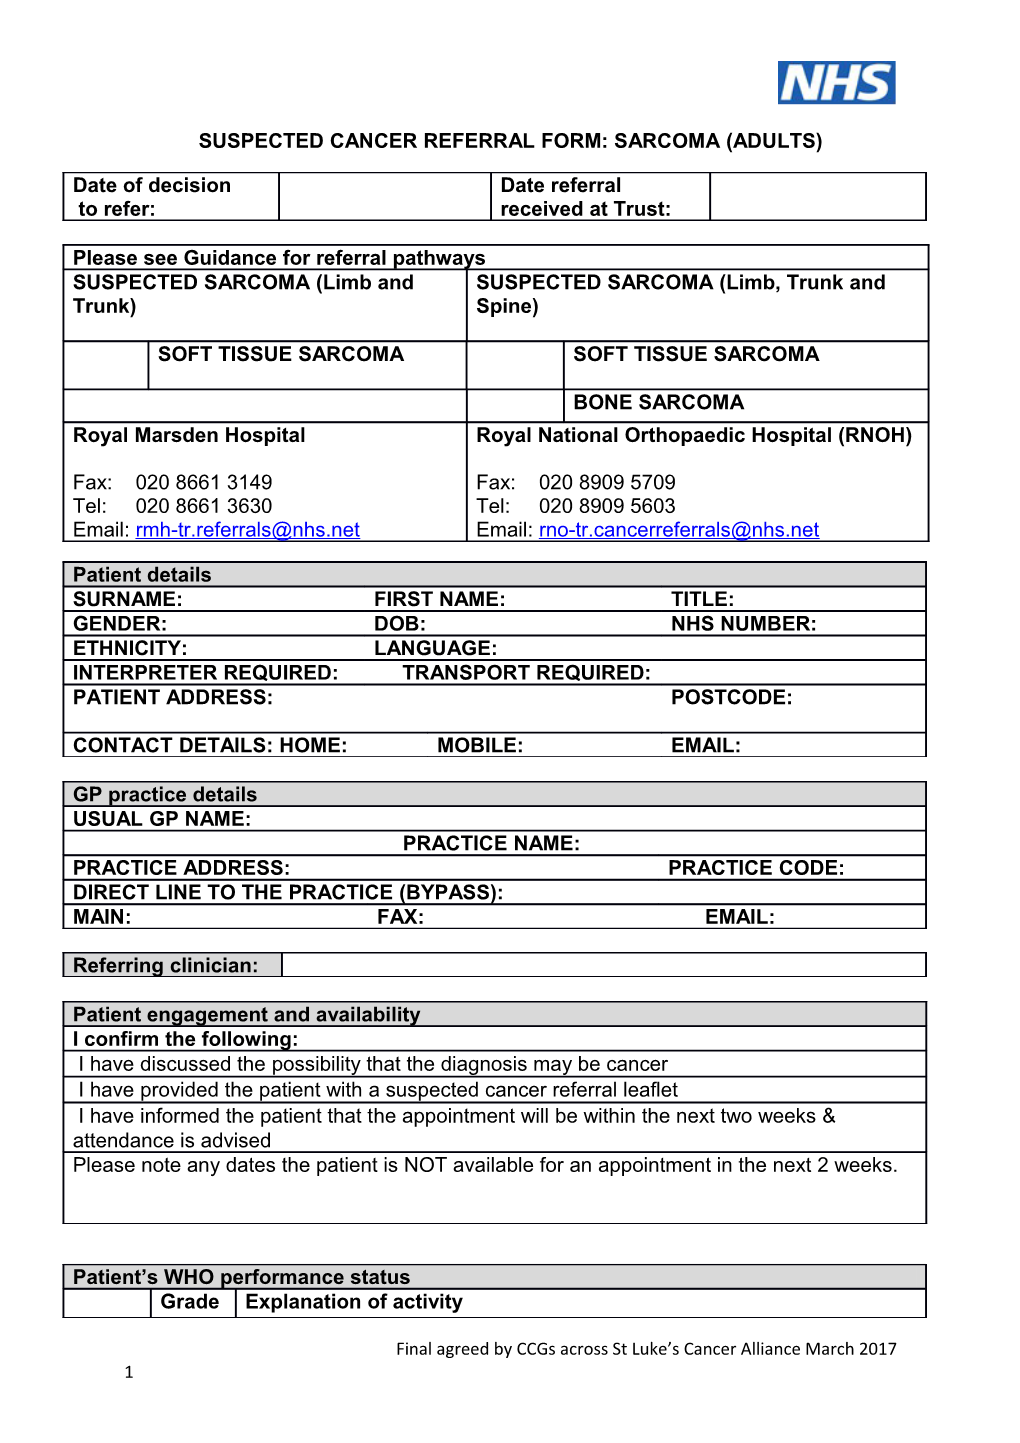 Suspected Cancer Referral Form: Sarcoma (Adults)